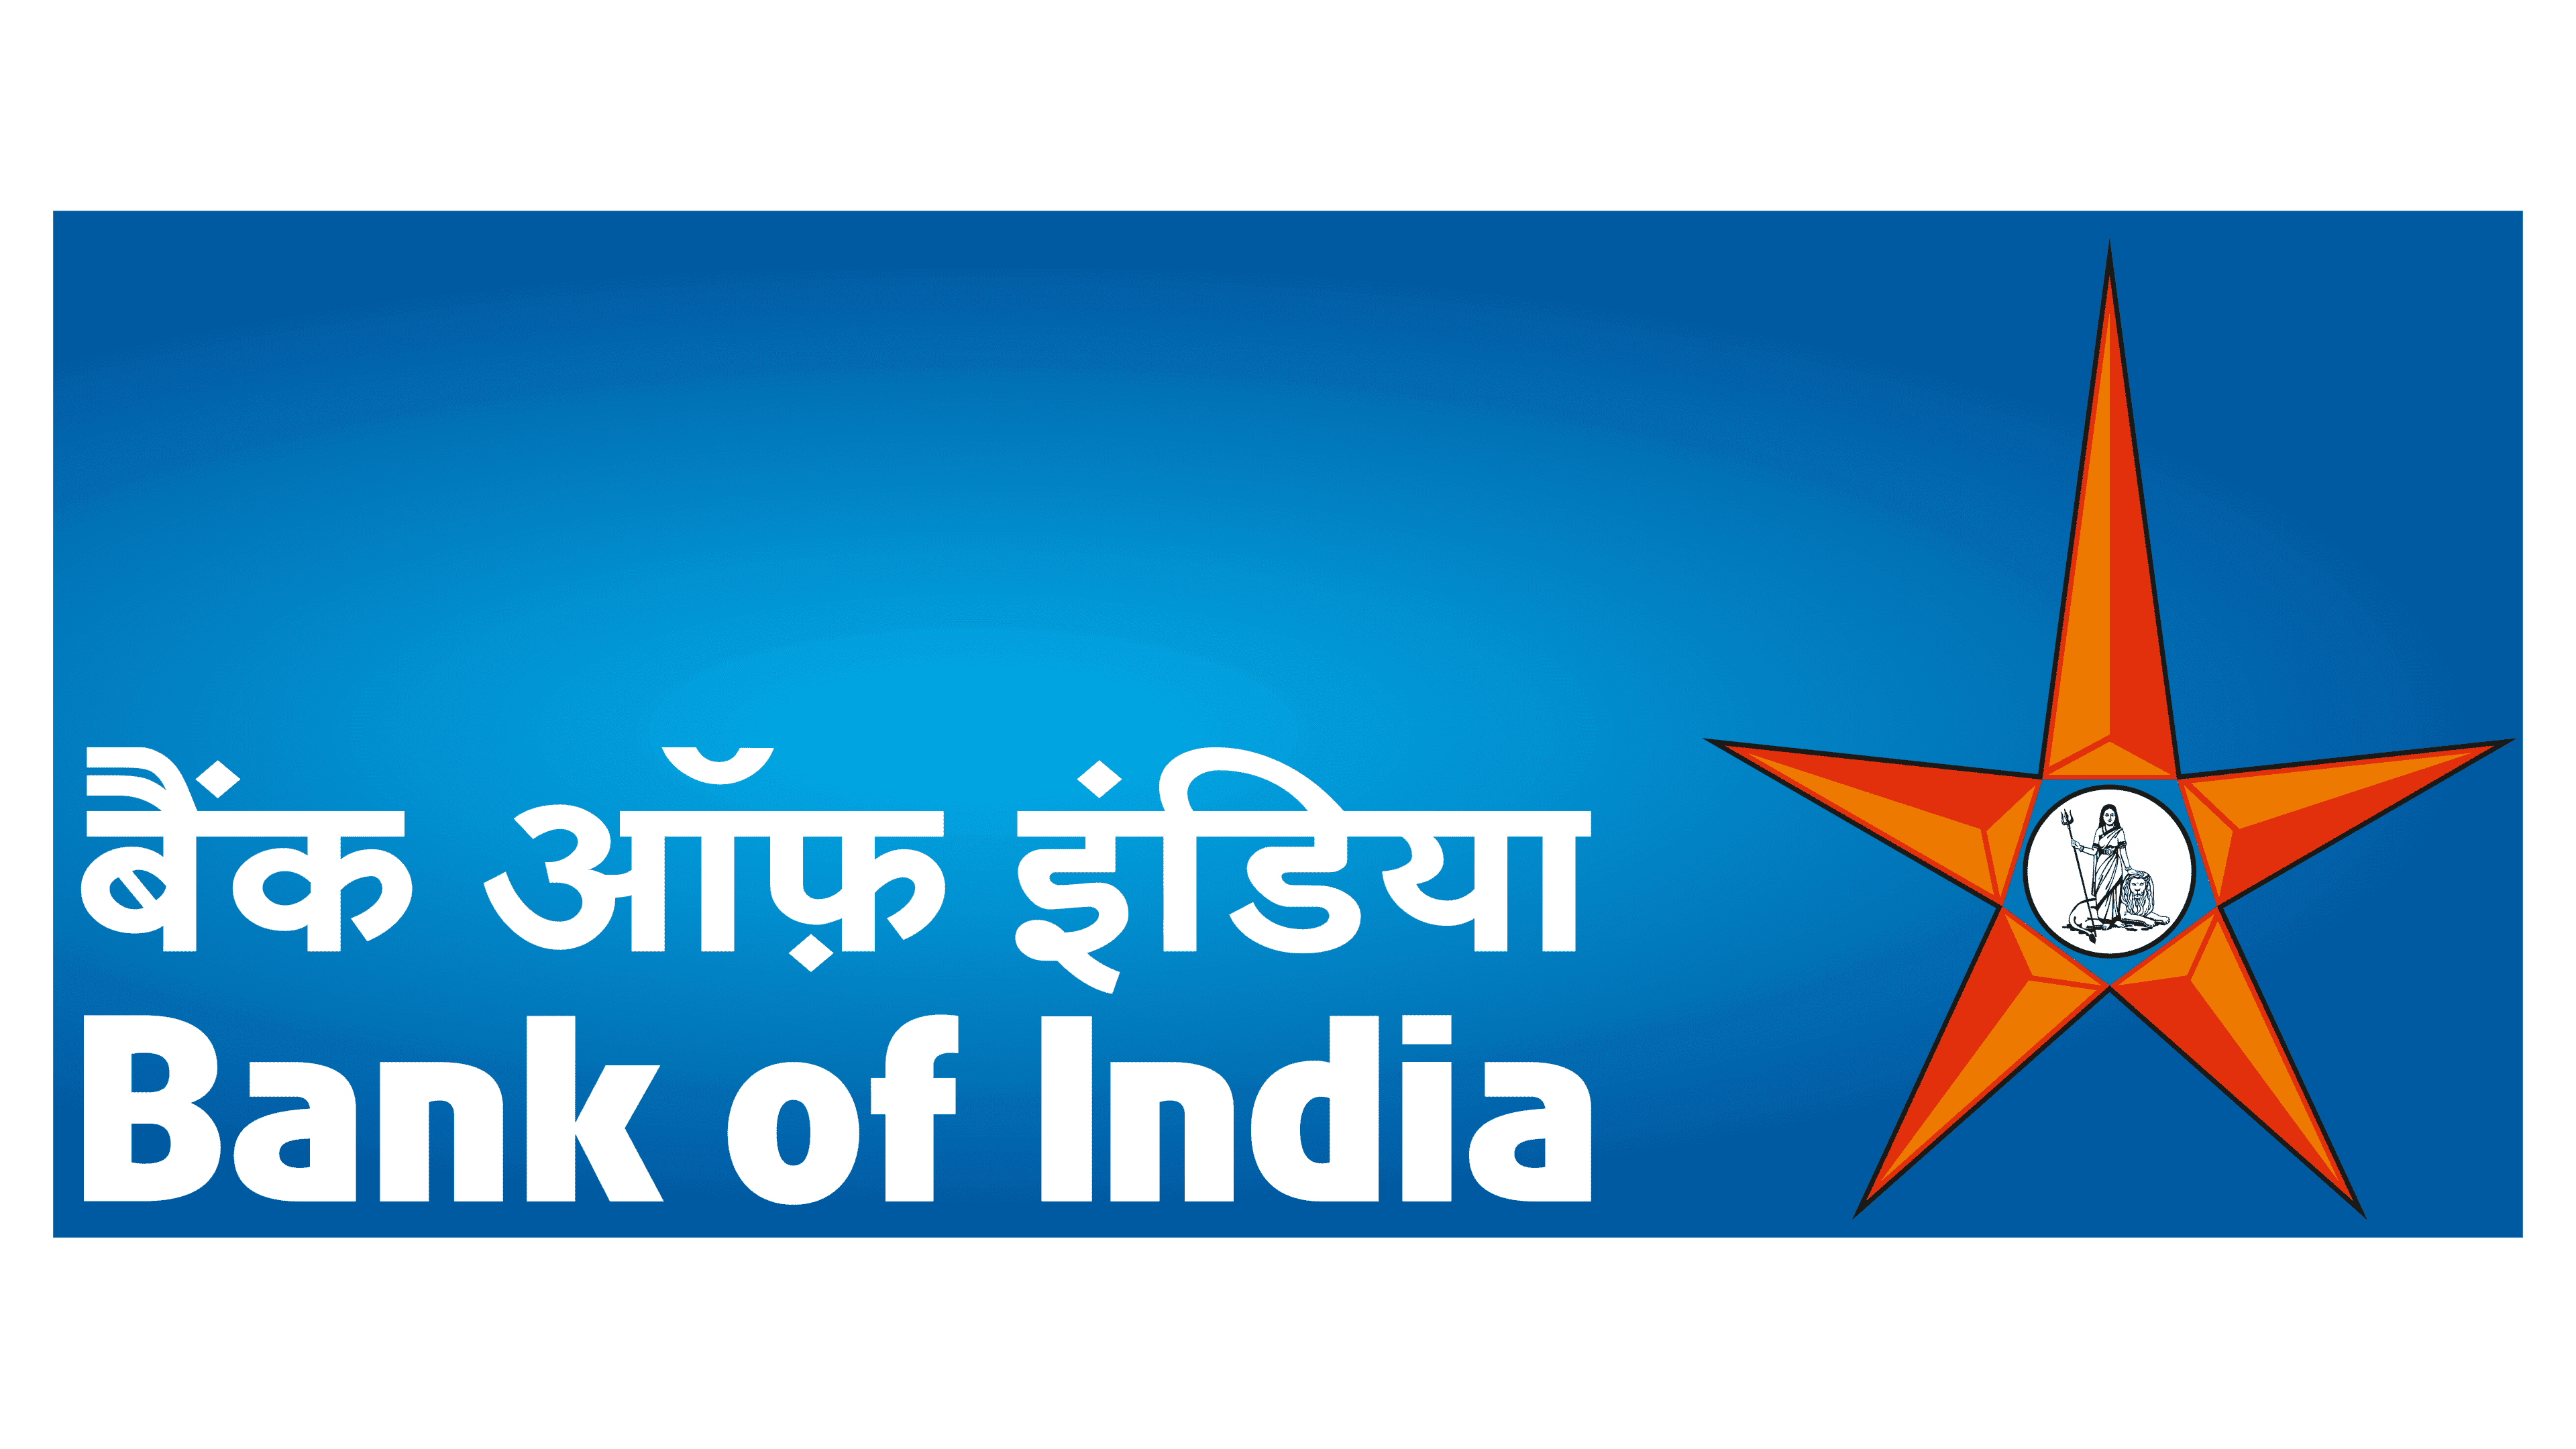 Bank of India Logo, symbol, meaning, history, PNG